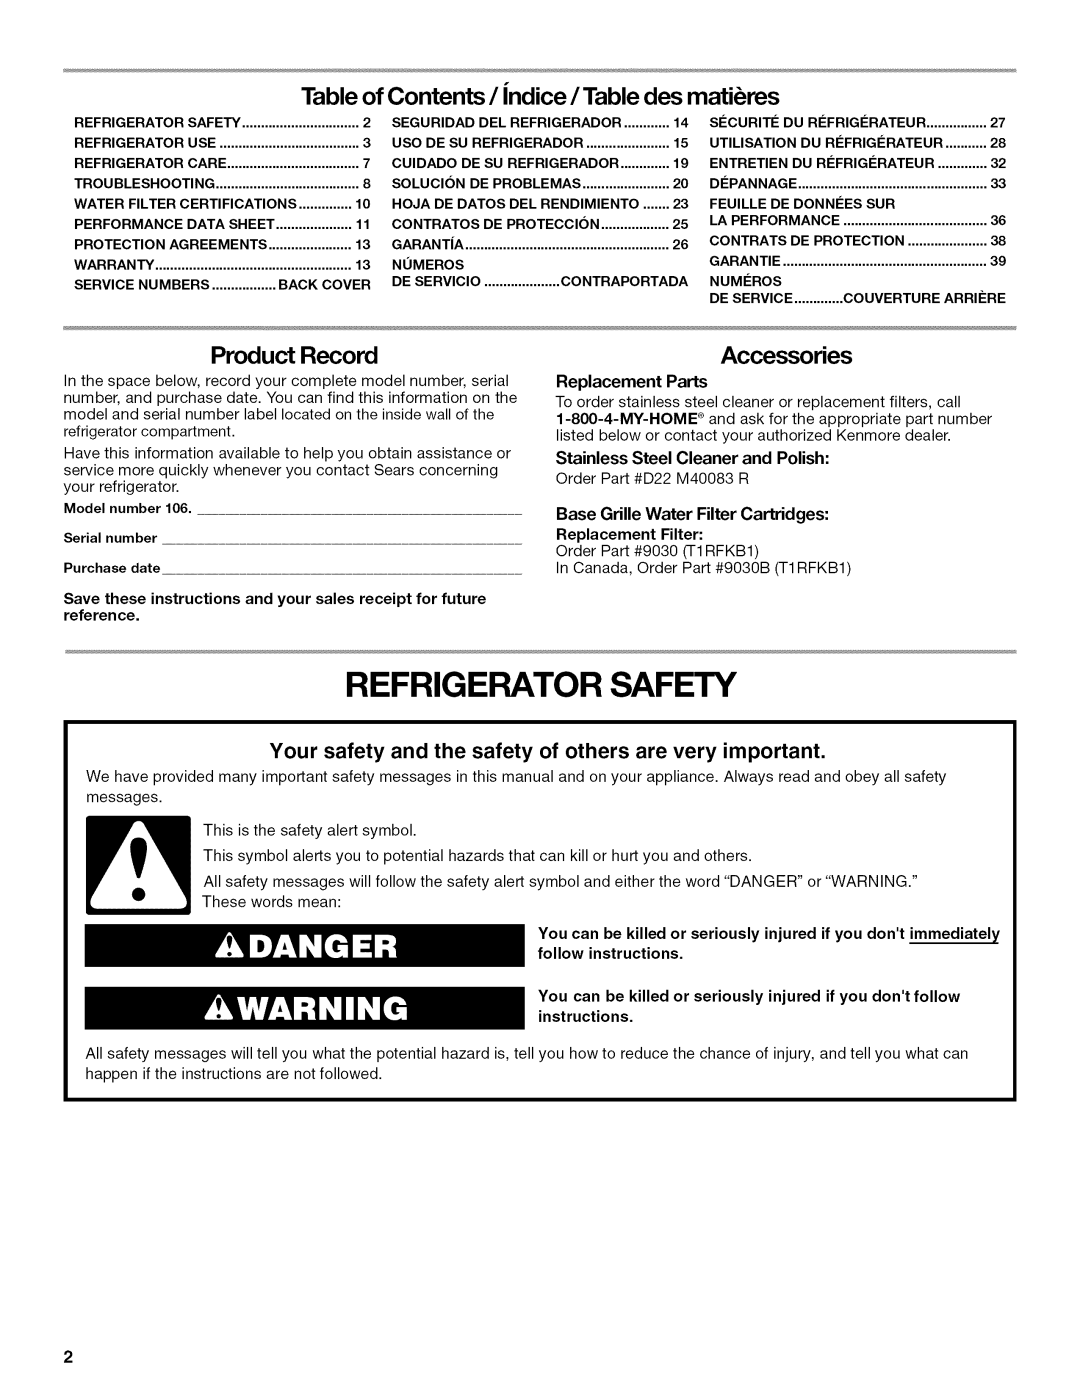 Kenmore 10646033801 Refrigerator Safety, Table of Contents / indice / Table des matibres, Product Record, Accessories 